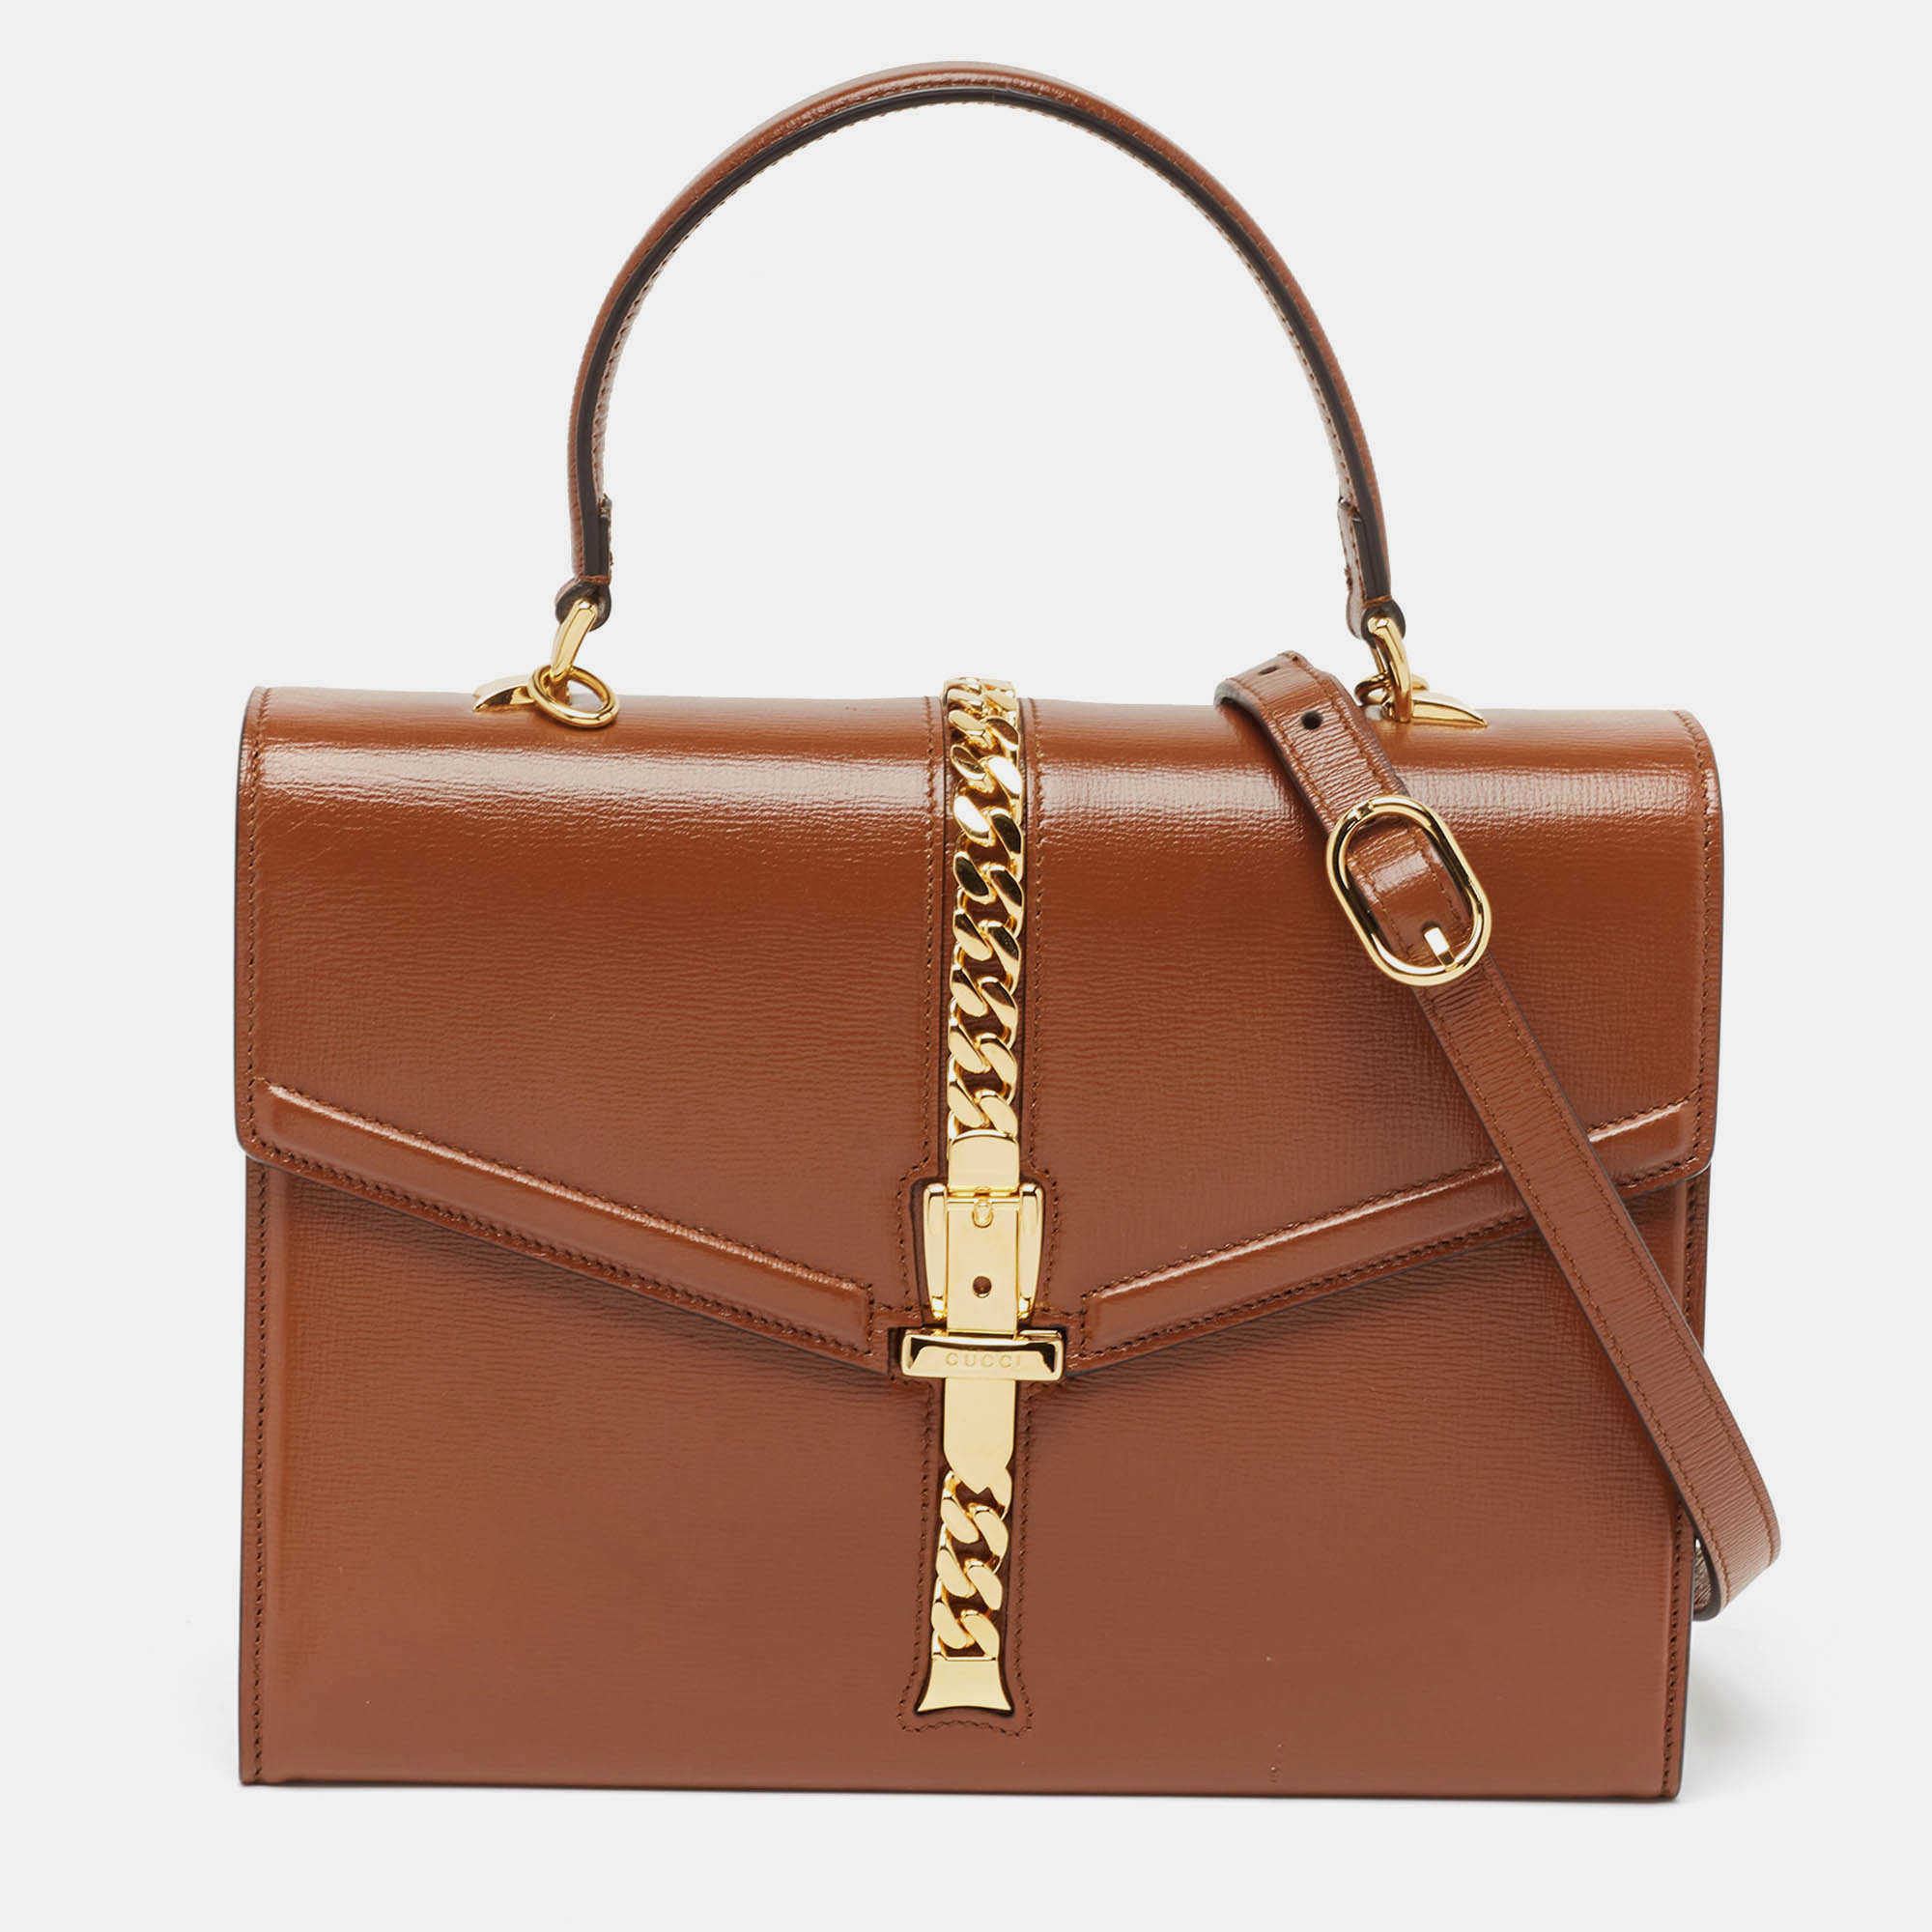 Gucci brown leather sylvie 1969 top handle bag